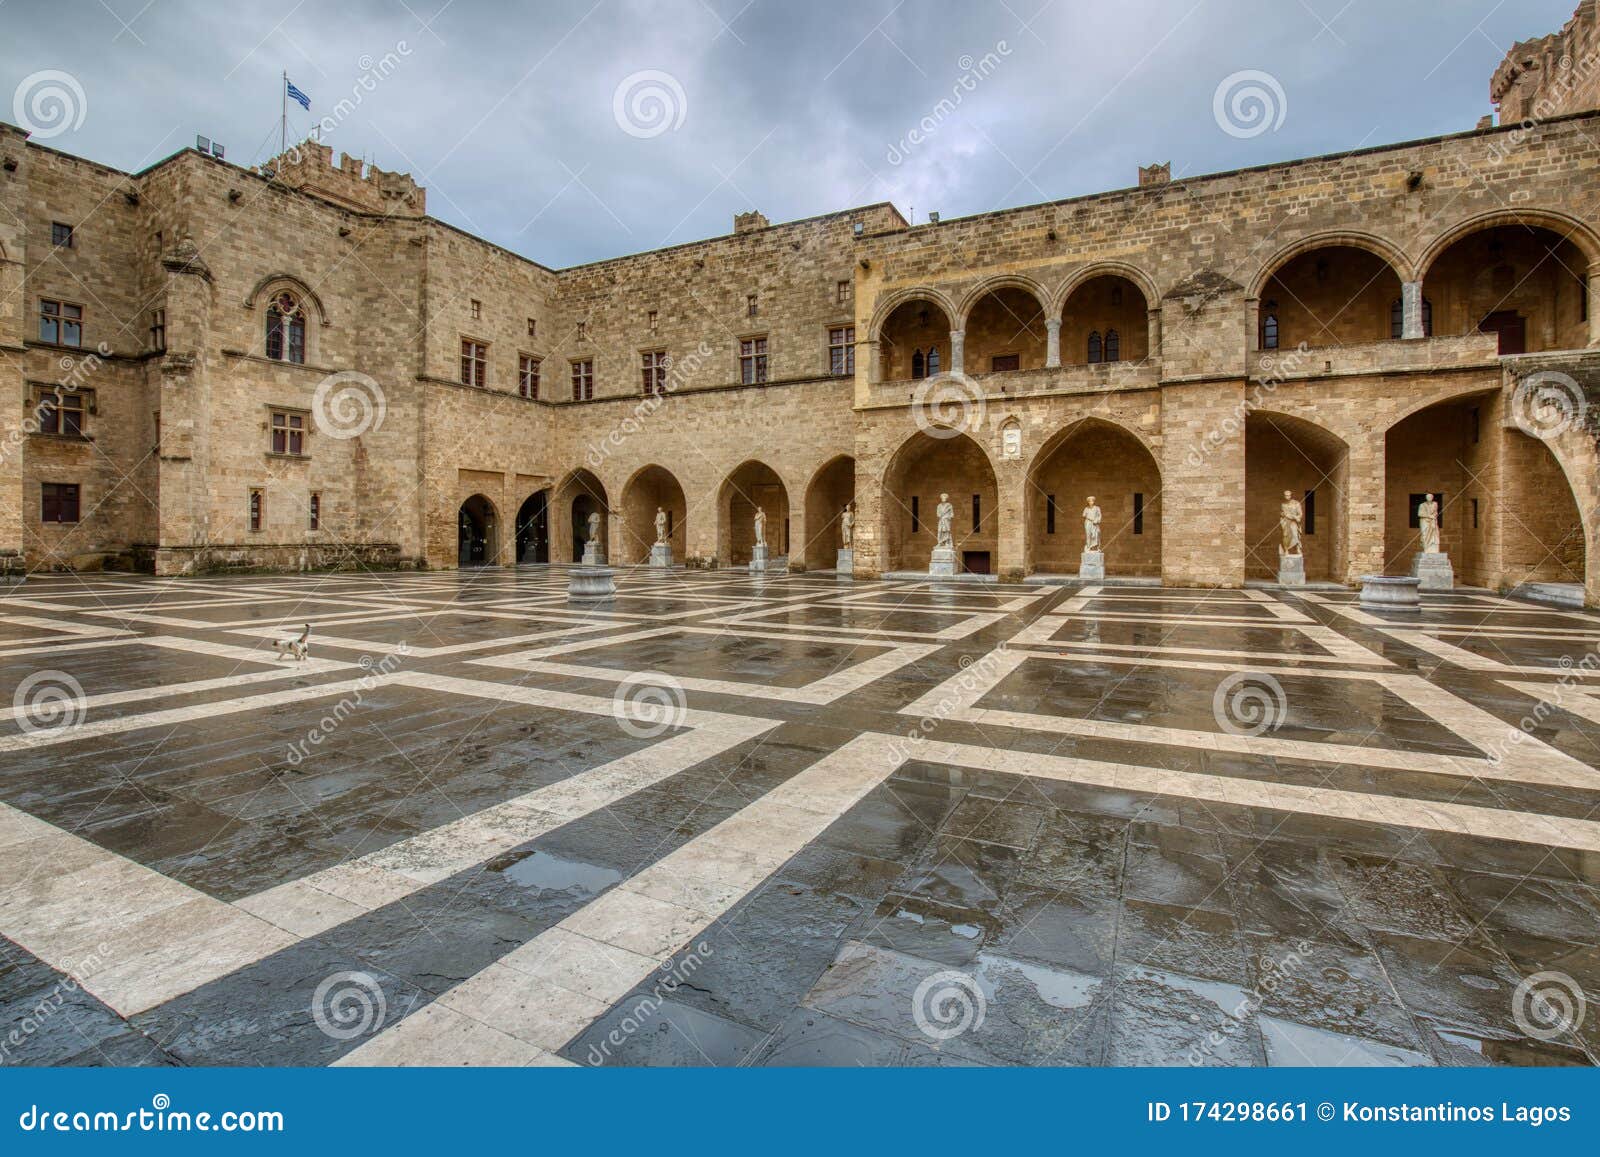 the palace of the grand master of the knights of rhodes